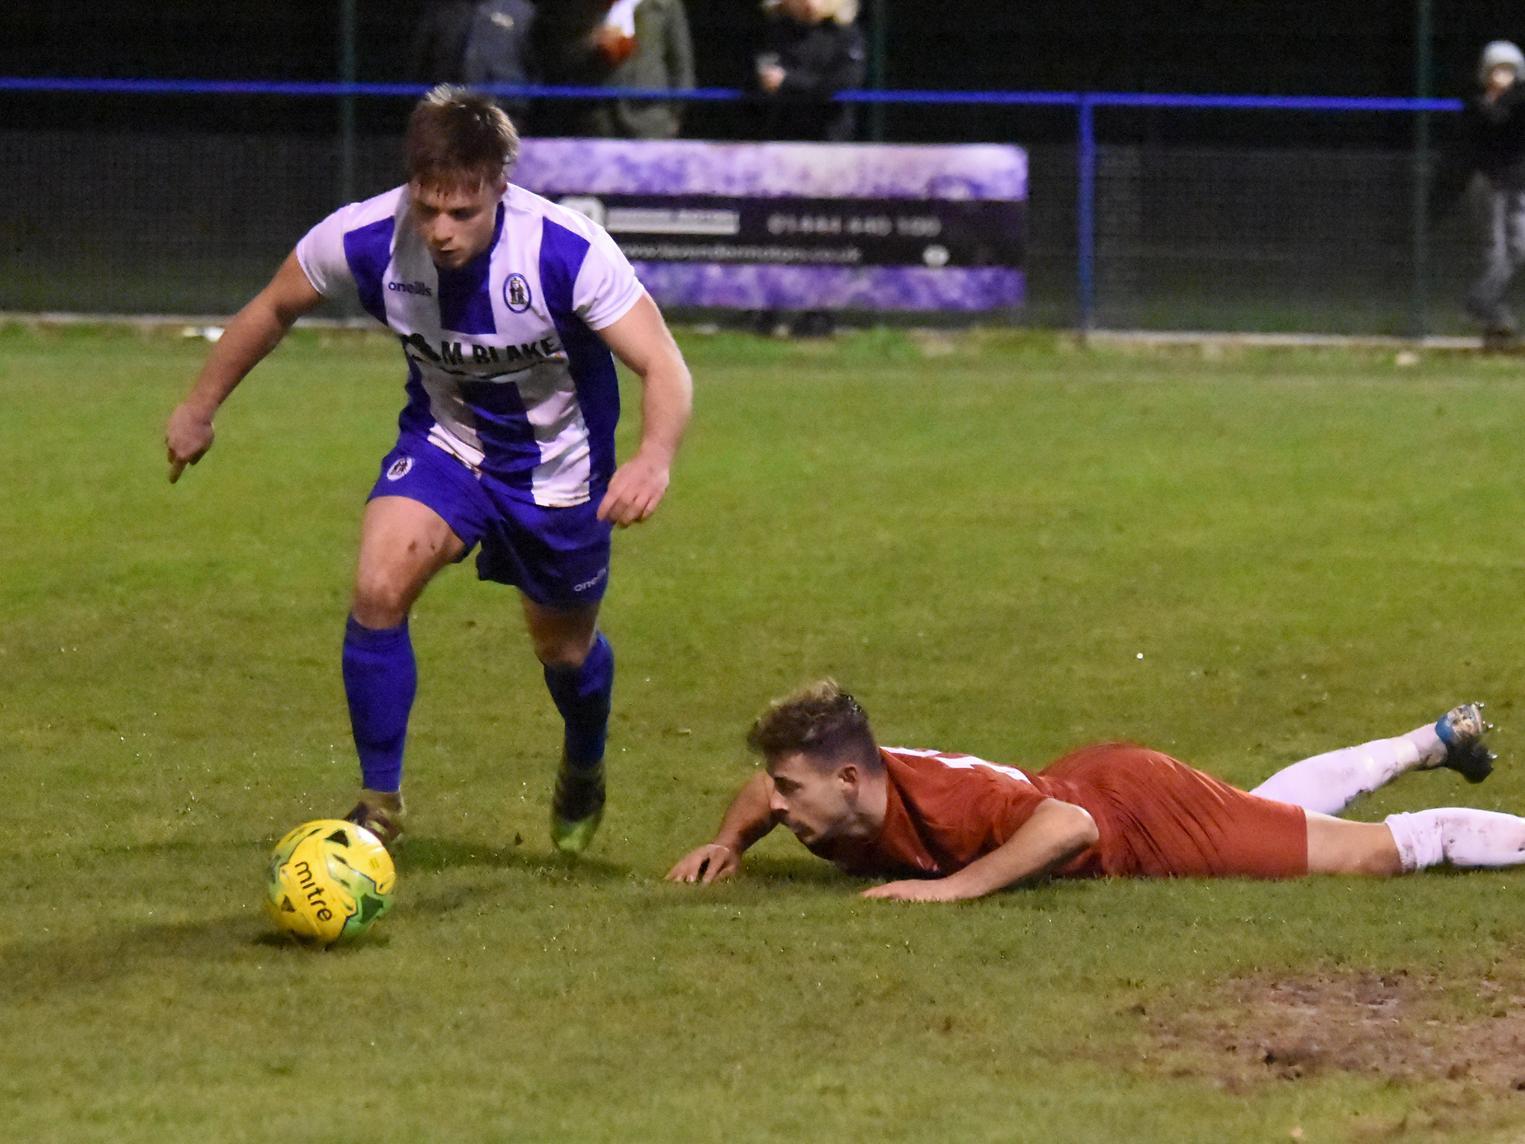 Tom Summerfield leaves a defender on the ground.